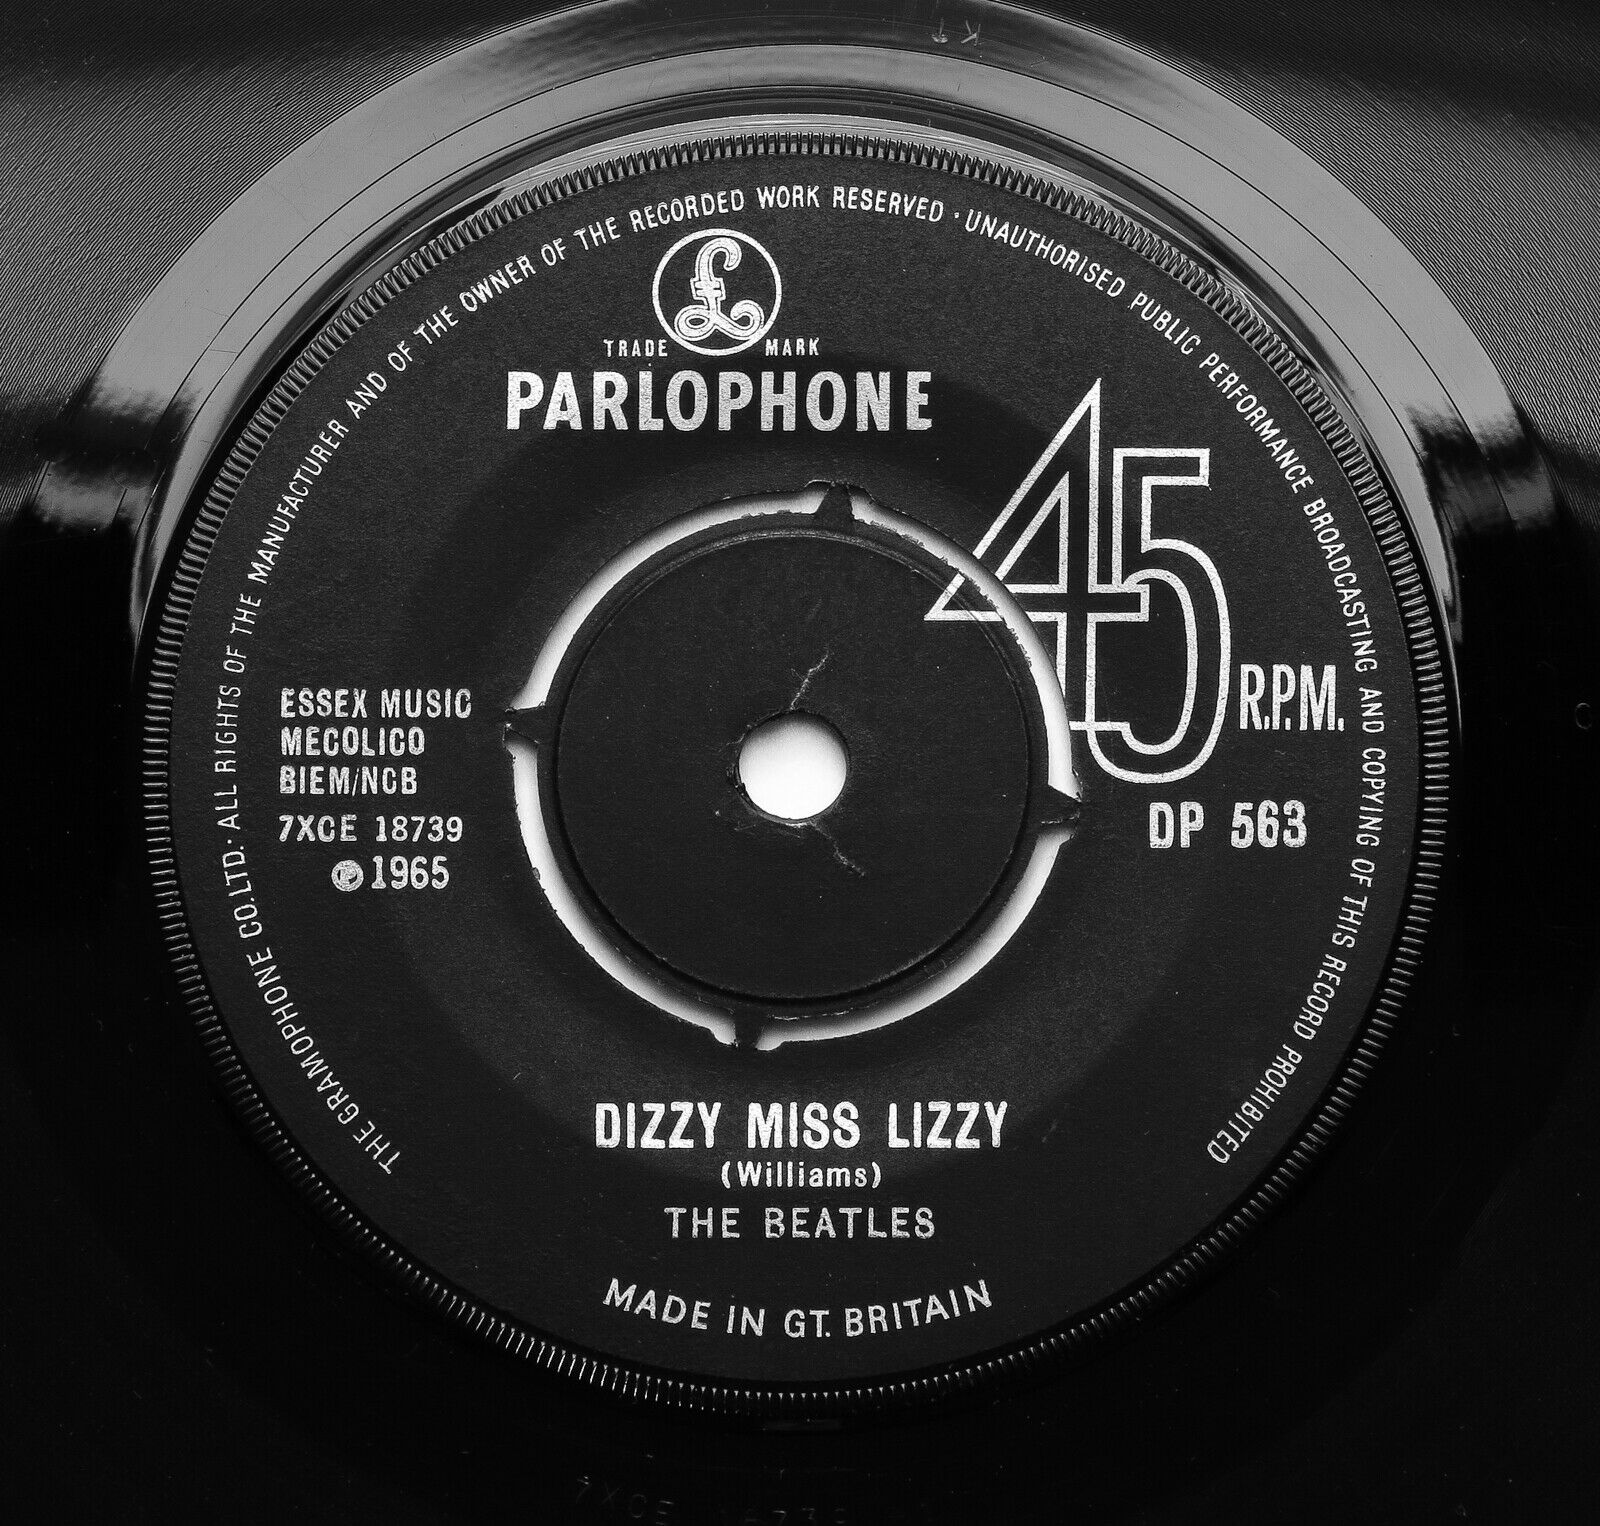 Pic 2 The Beatles - Yesterday/Dizzy Miss Lizzy - UK 1965 *EXPORT* 45 DP 563 1/G